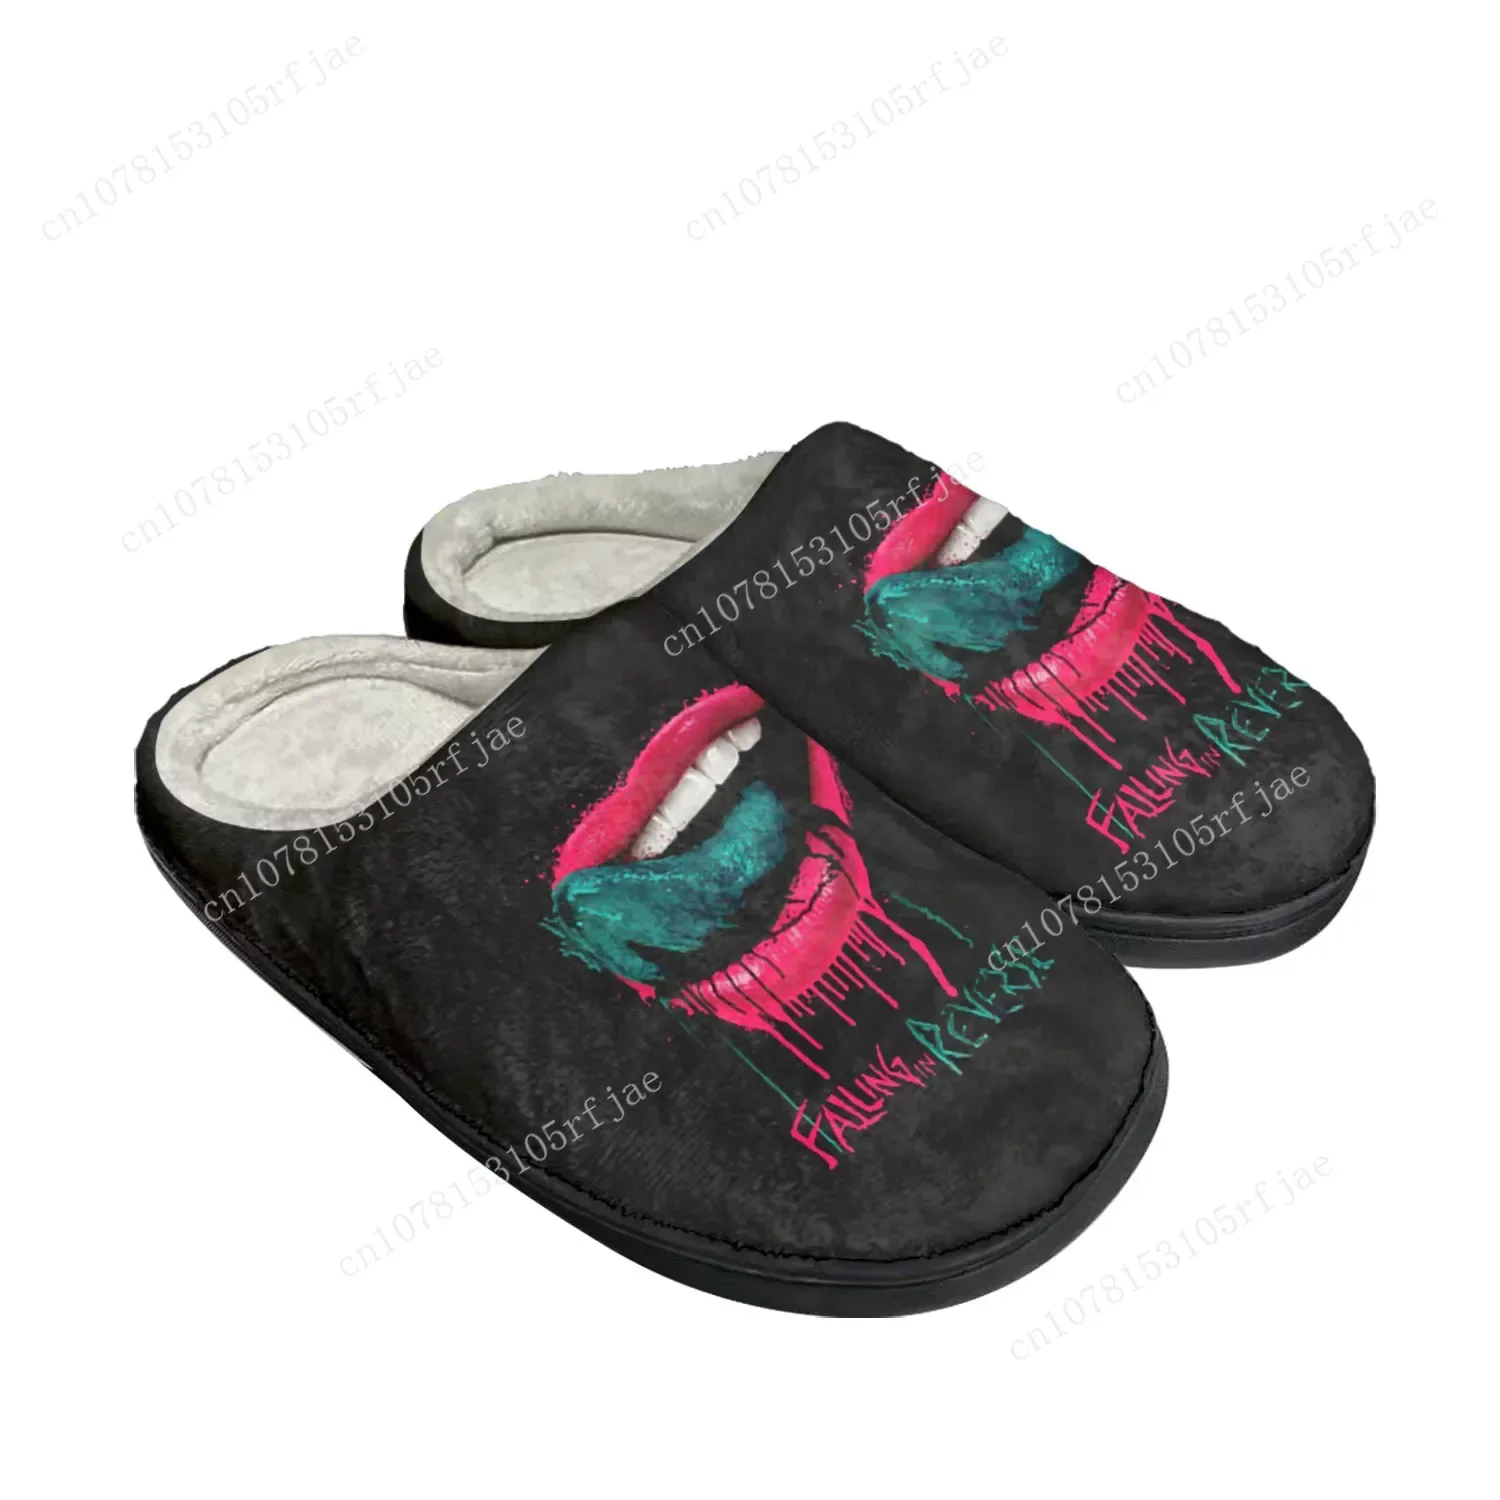 

Falling In Reverse Punk Rock Band Home Cotton Custom Slippers Mens Womens Sandals Plush Bedroom Keep Warm Shoe Thermal Slipper